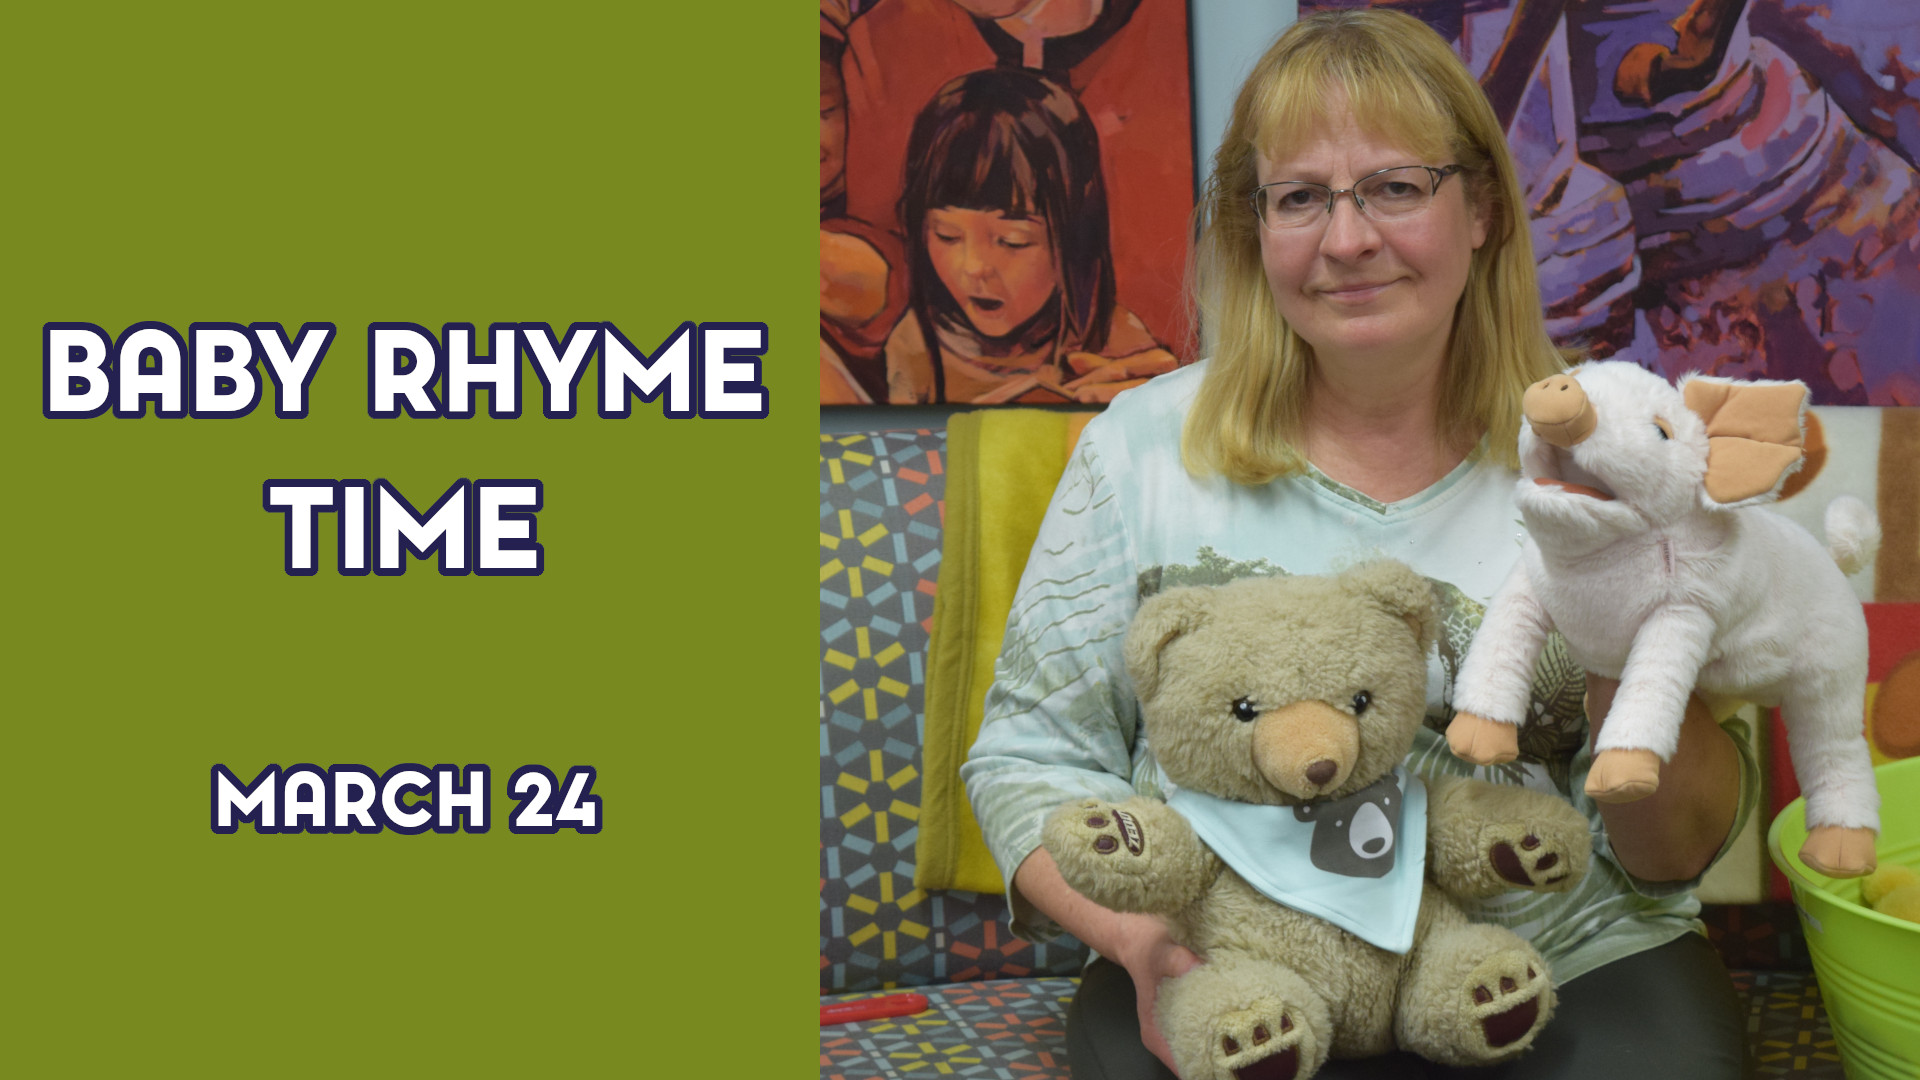 A woman holds stuffed animals next to the text "Baby Rhyme Time March 24"